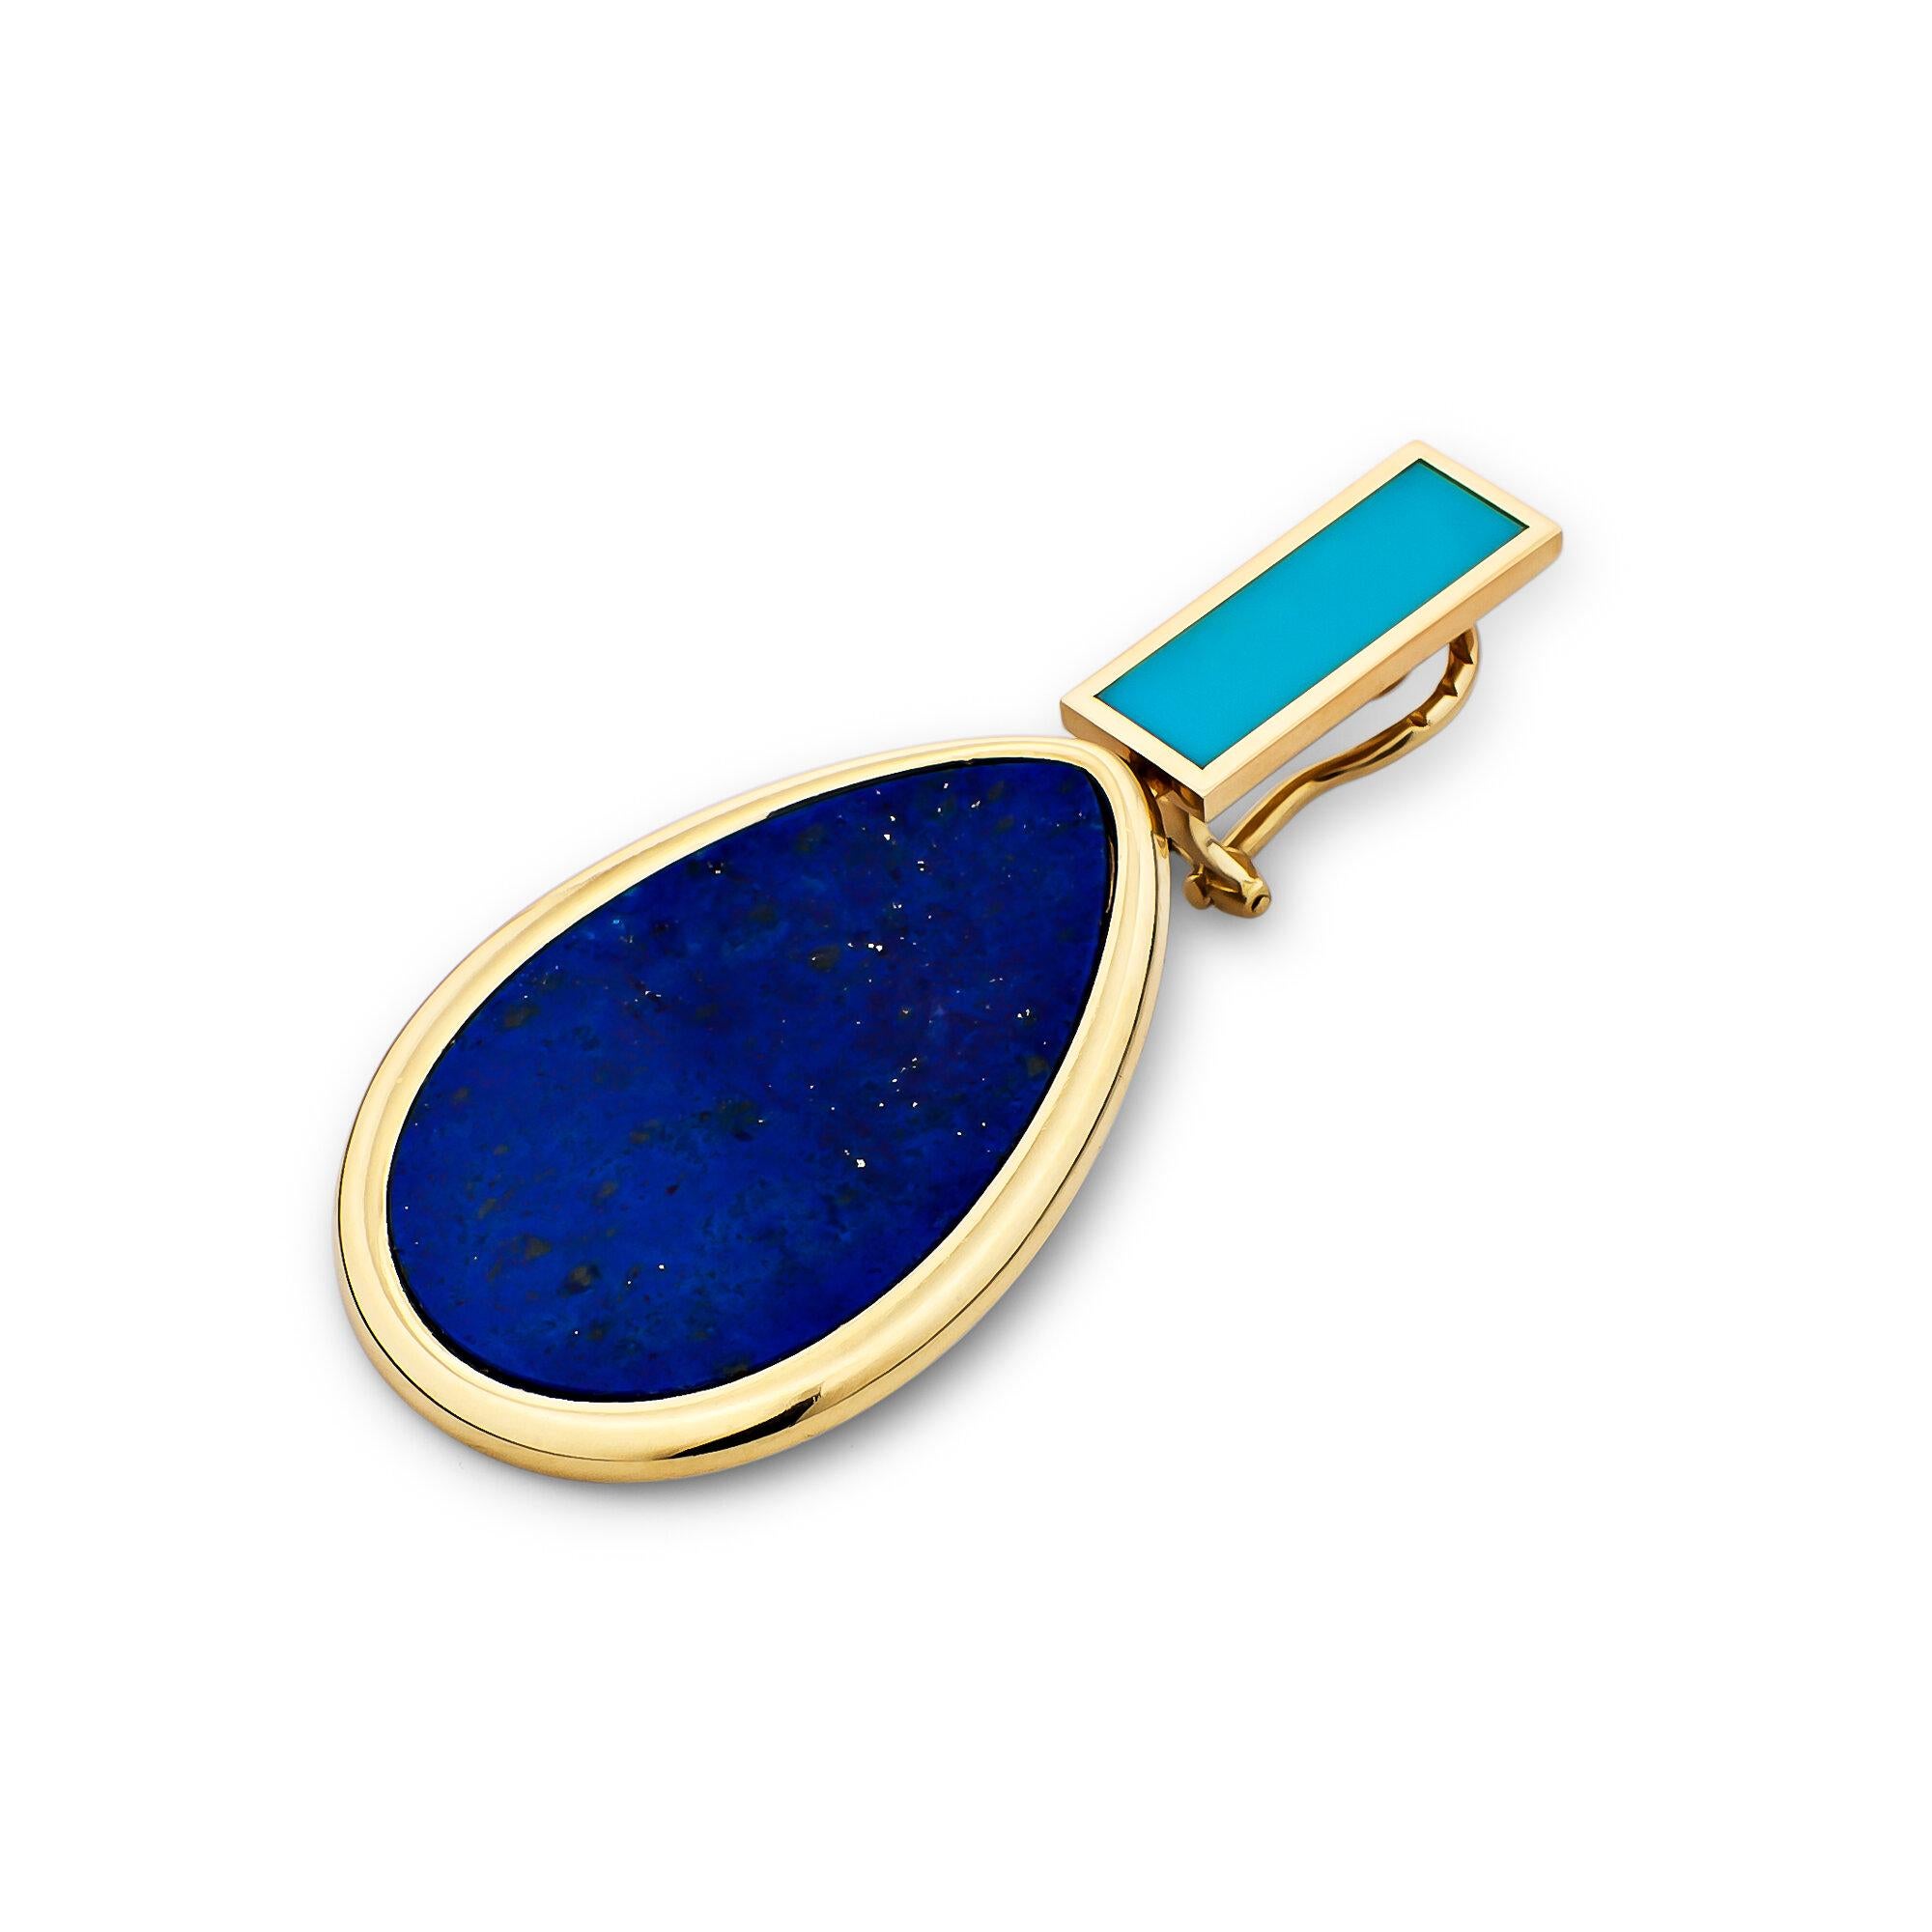 Packing a colorful punch of contrasting cool turquoise and electric blue lapis, these vintage Piaget gold drop earrings have a clean and modern spirit.  18 karat yellow gold.  2 1/8